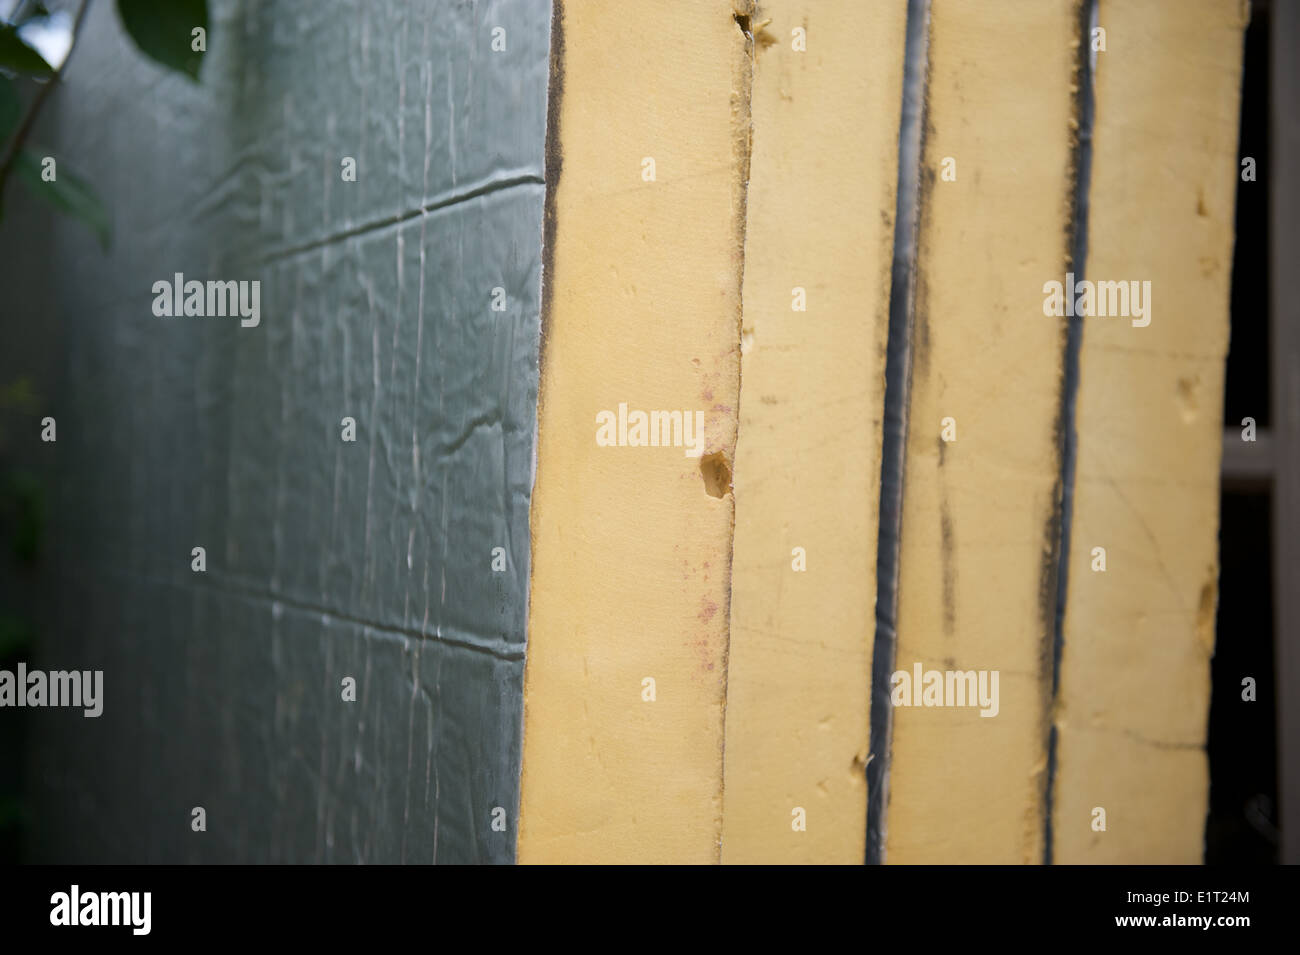 Building materials roof insulation panels Stock Photo